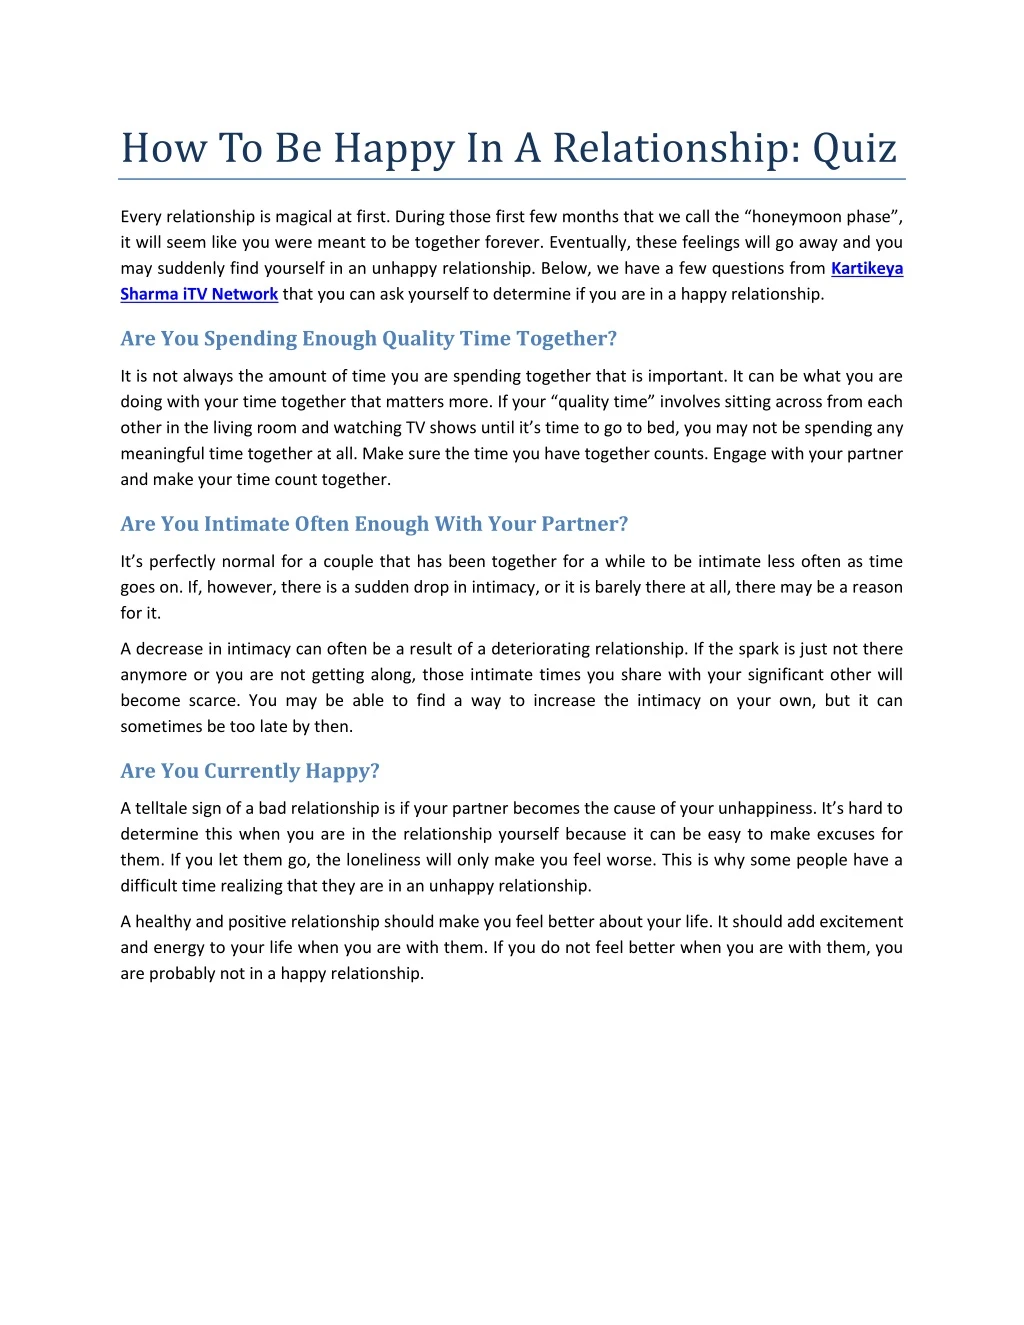 how to be happy in a relationship quiz